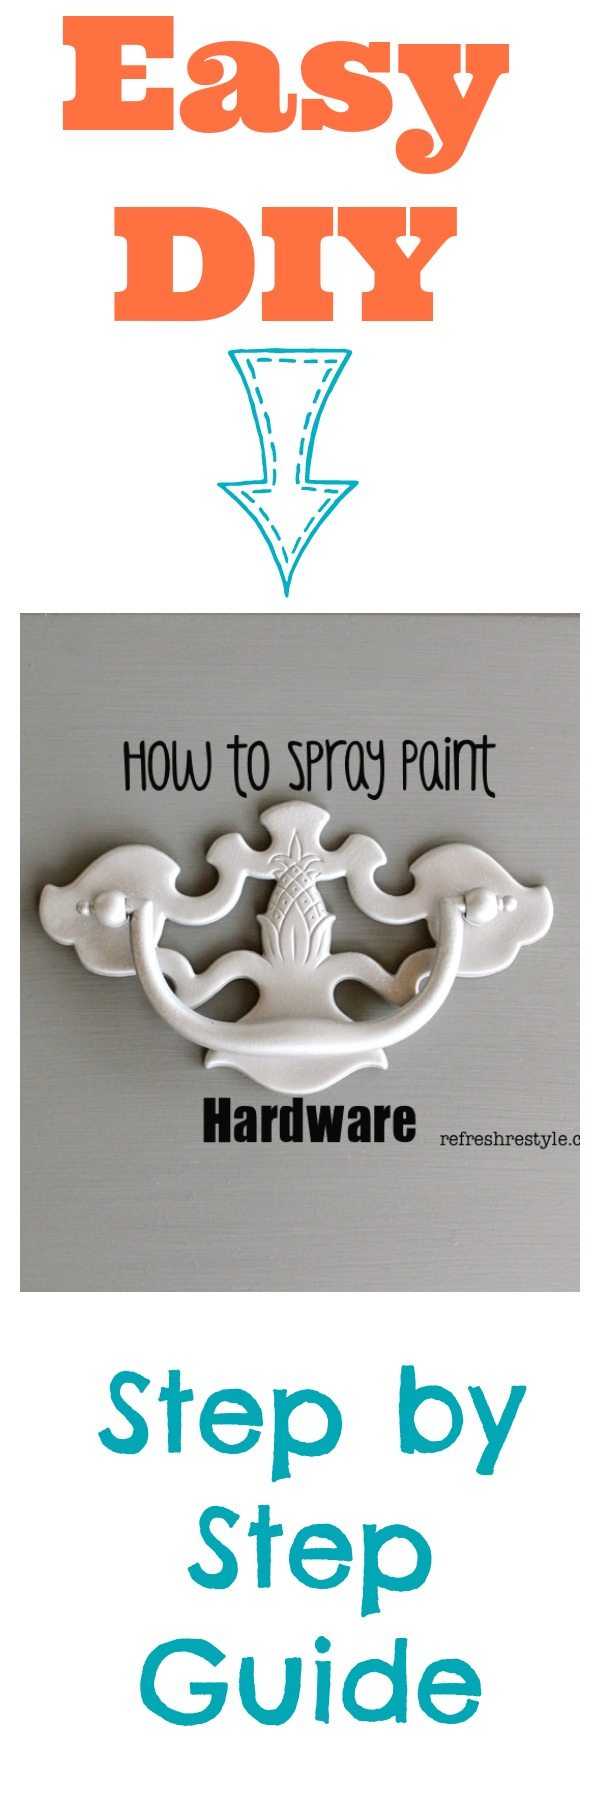 How to spray paint hardware